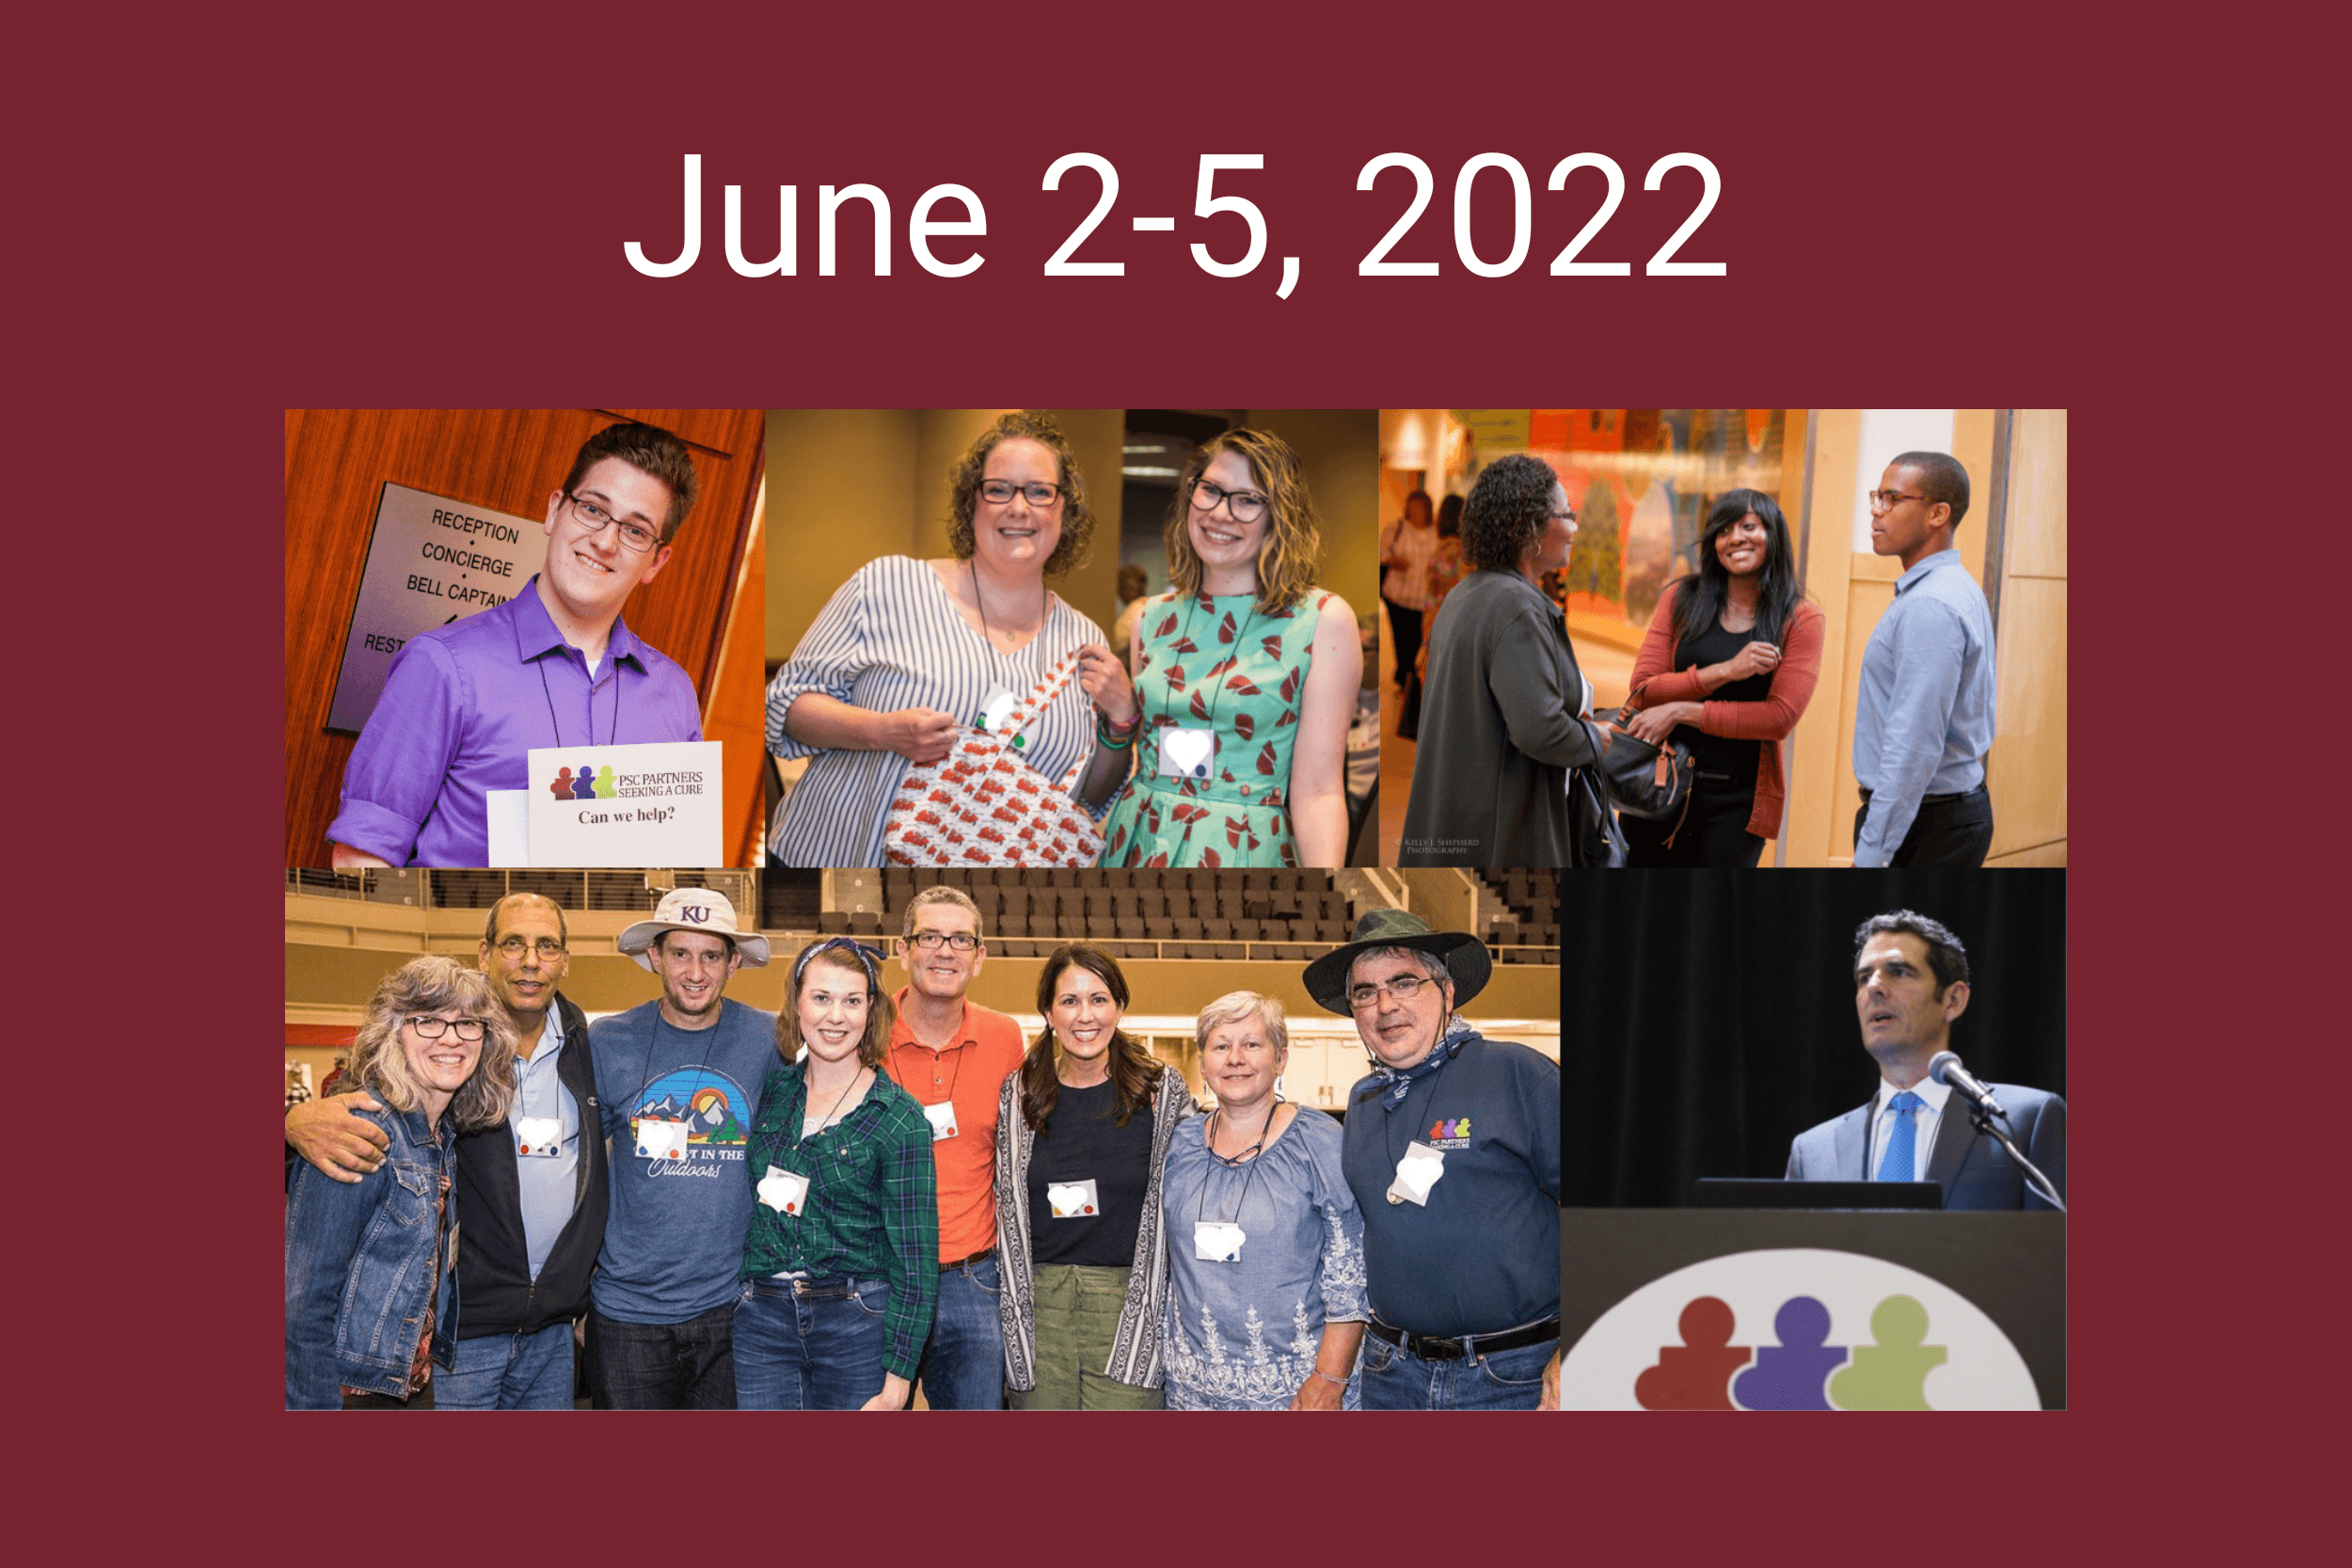 We are excited to learn, collaborate and network with you at our 2022 Annual PSC Partners Conference!